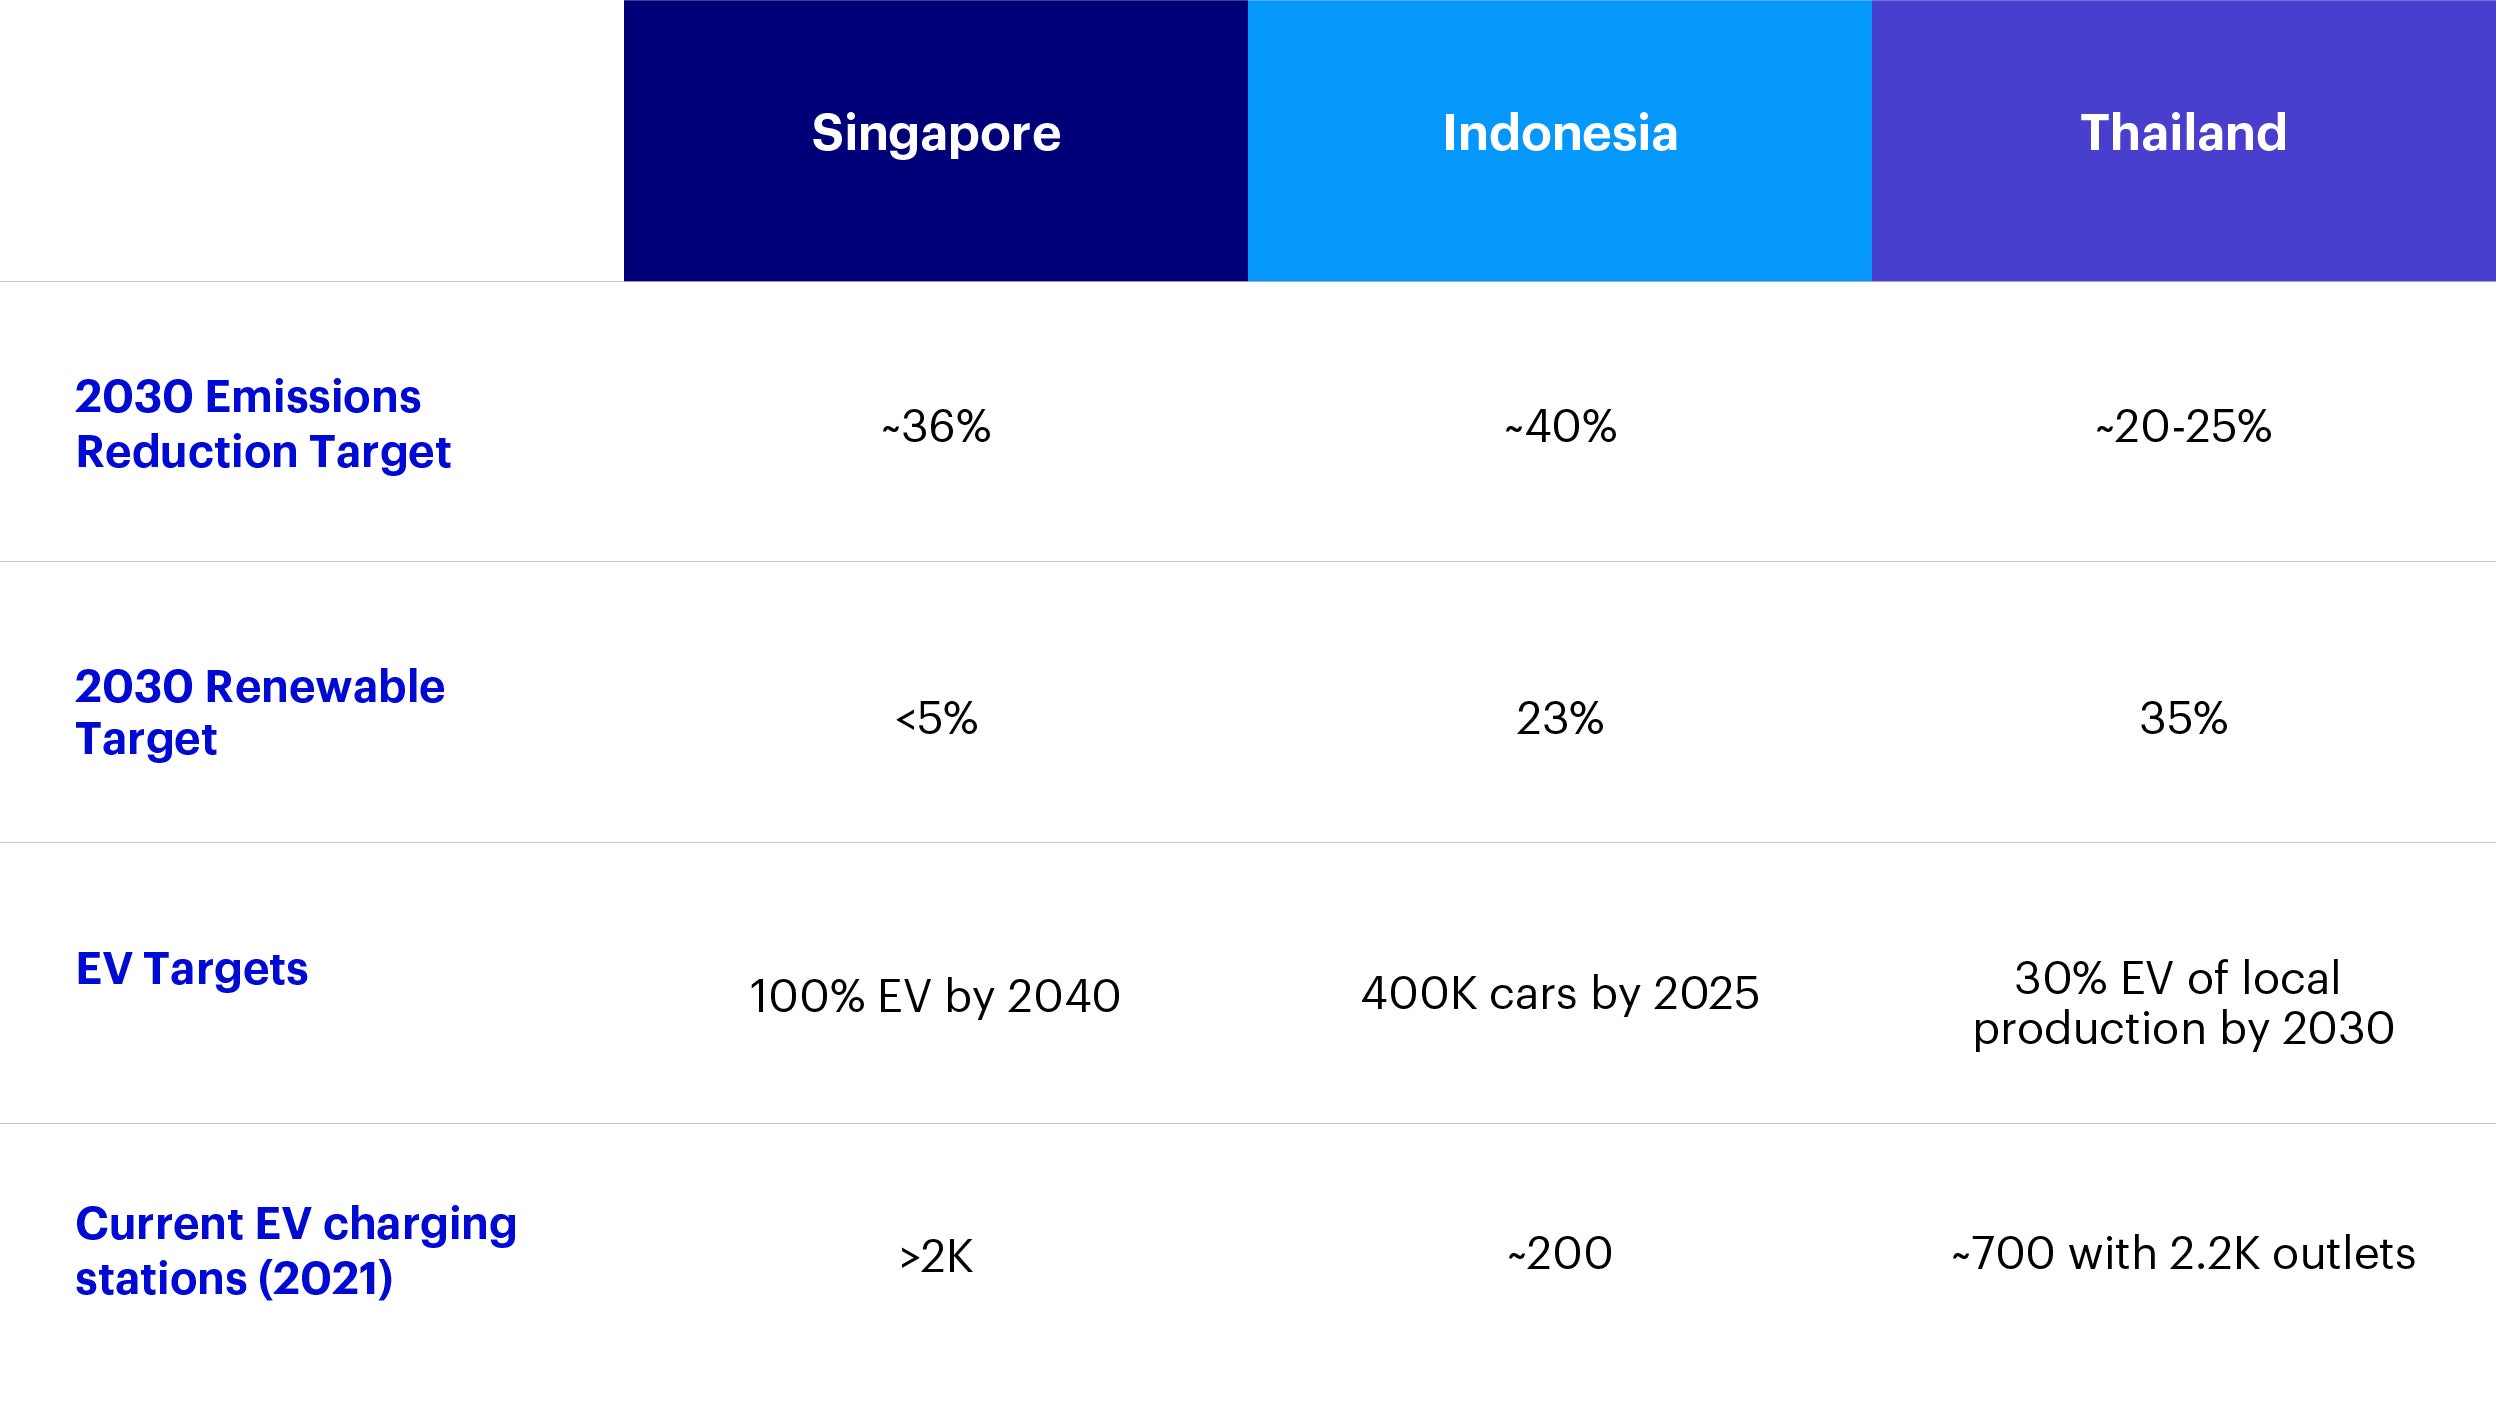 Figure 1: Key decarbonization data for Singapore, Indonesia, and Thailand